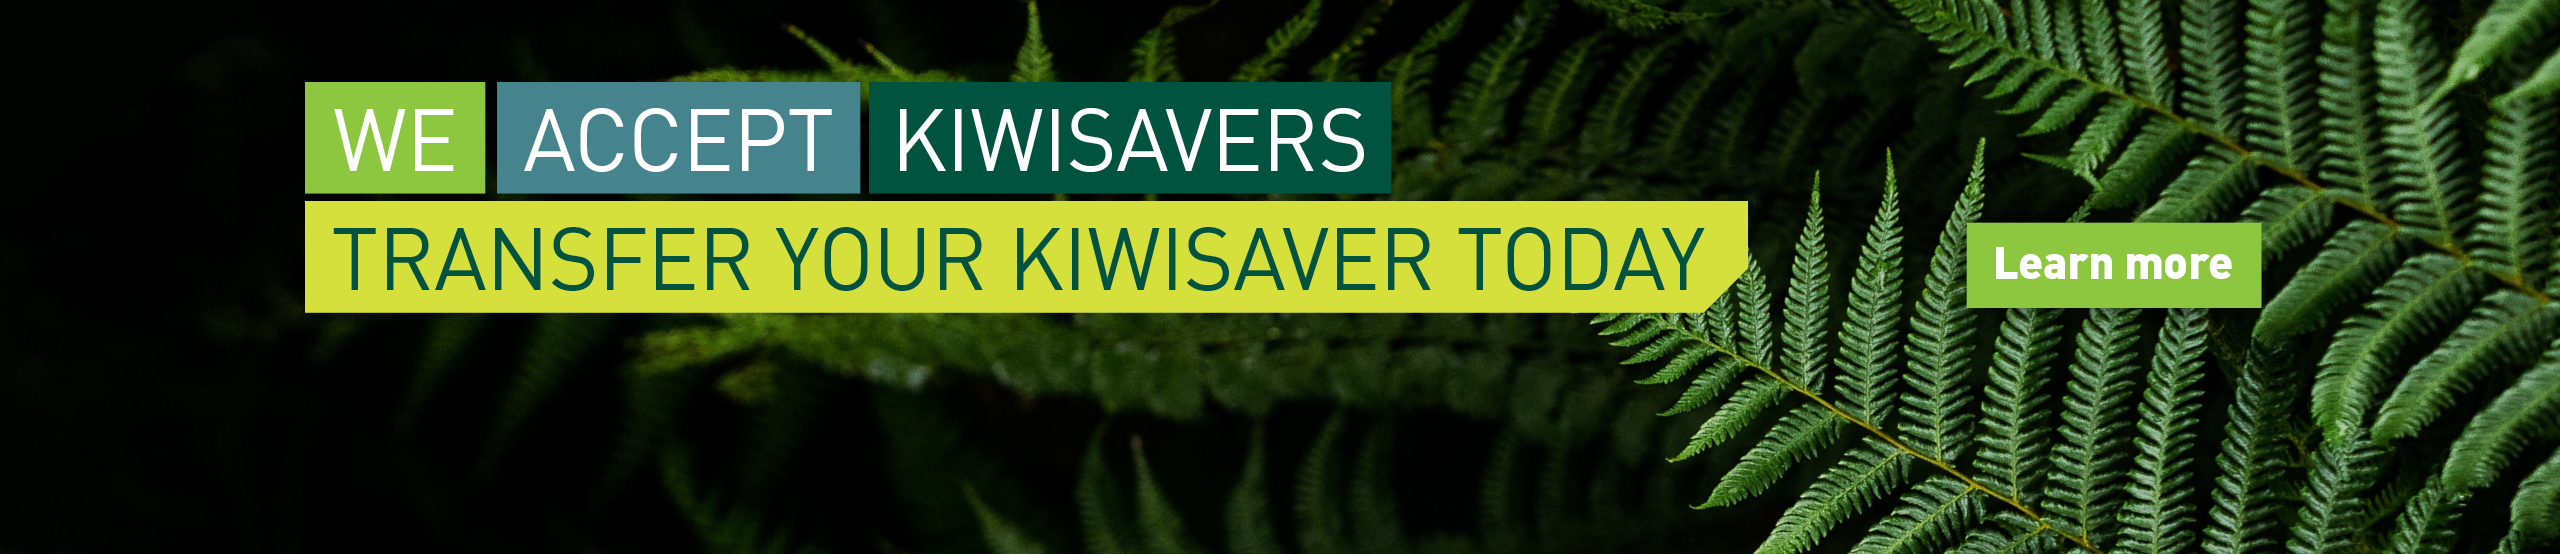 We accept KiwiSavers. Transfer your KiwiSaver today. Learn more